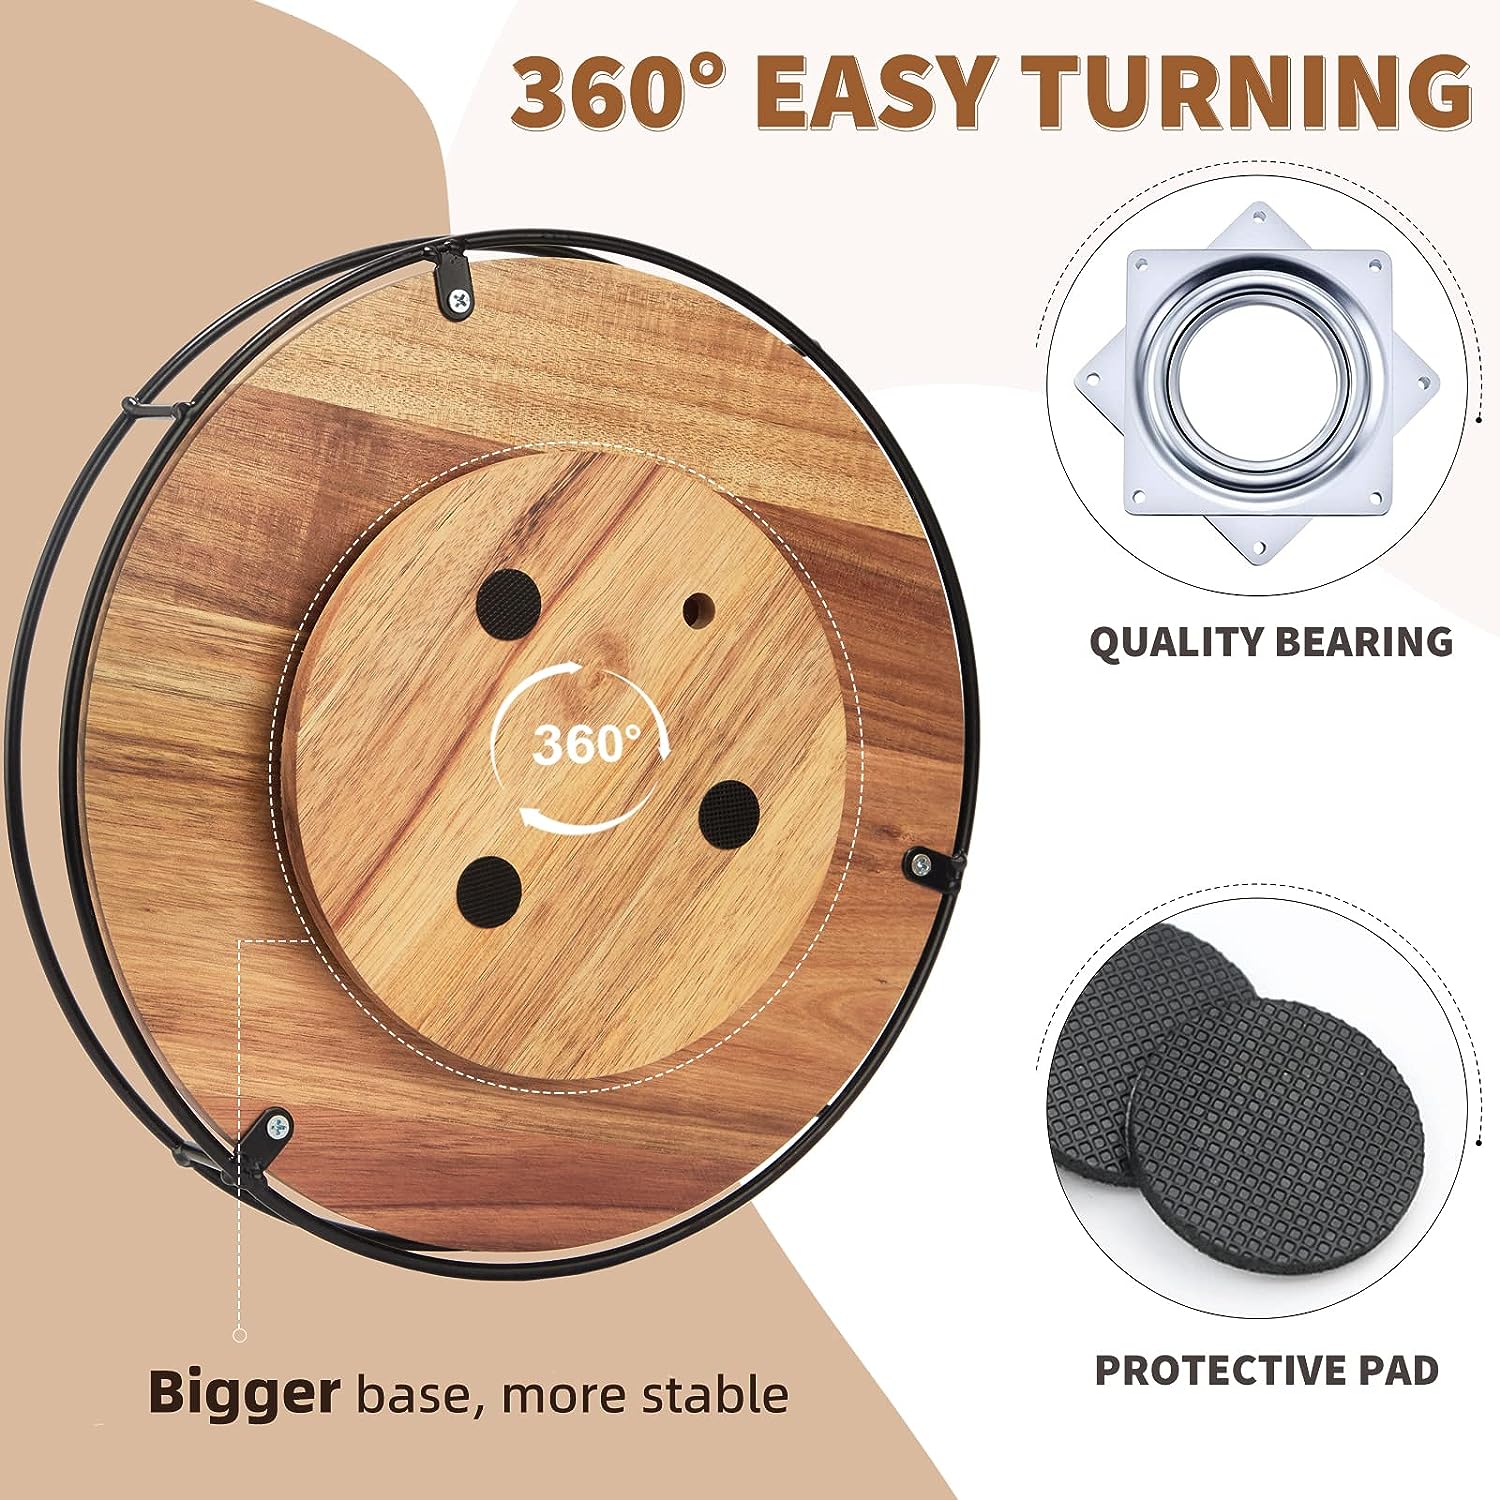 12 Acacia Wood Lazy Susan Turntable, Tomoaza Kitchen Organizer Turntable with Steel Sides, 360 Degree Turntable for Countertop Cabinet or Dining Table(Black)